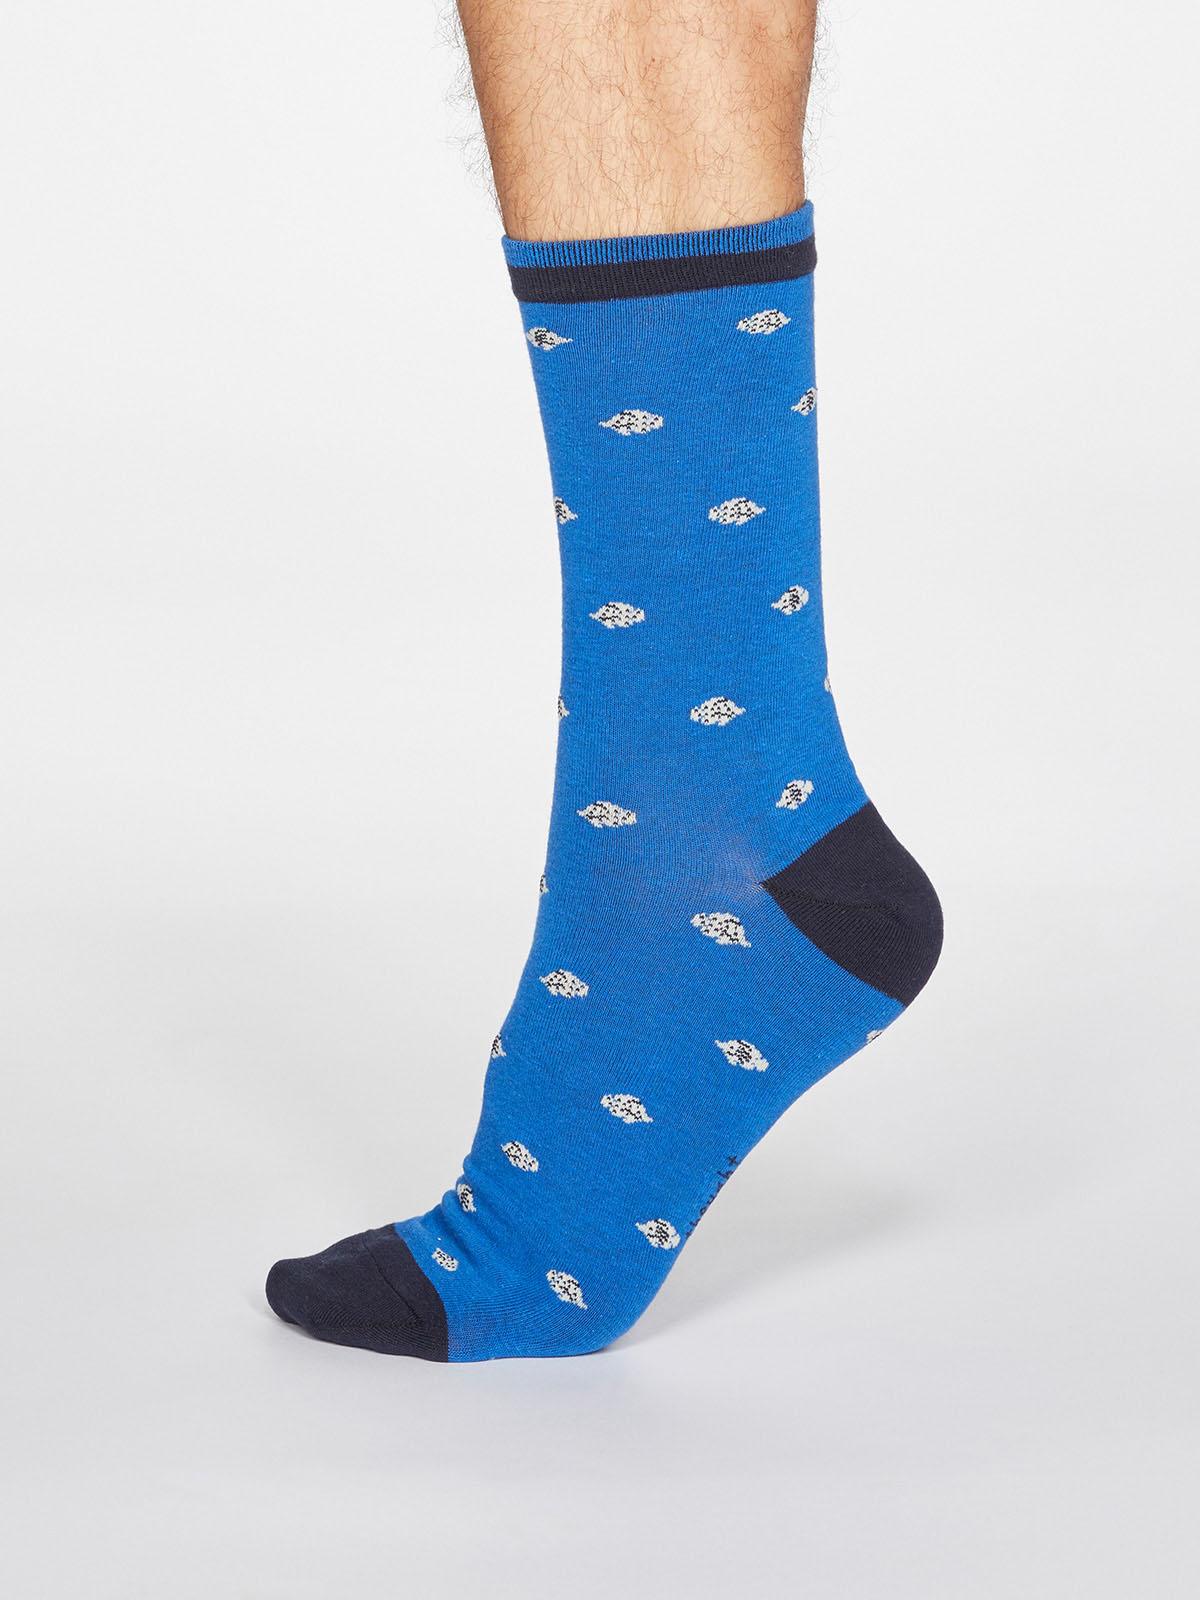 Carlos Sea Creatures Socks - Bright Blue - Thought Clothing UK